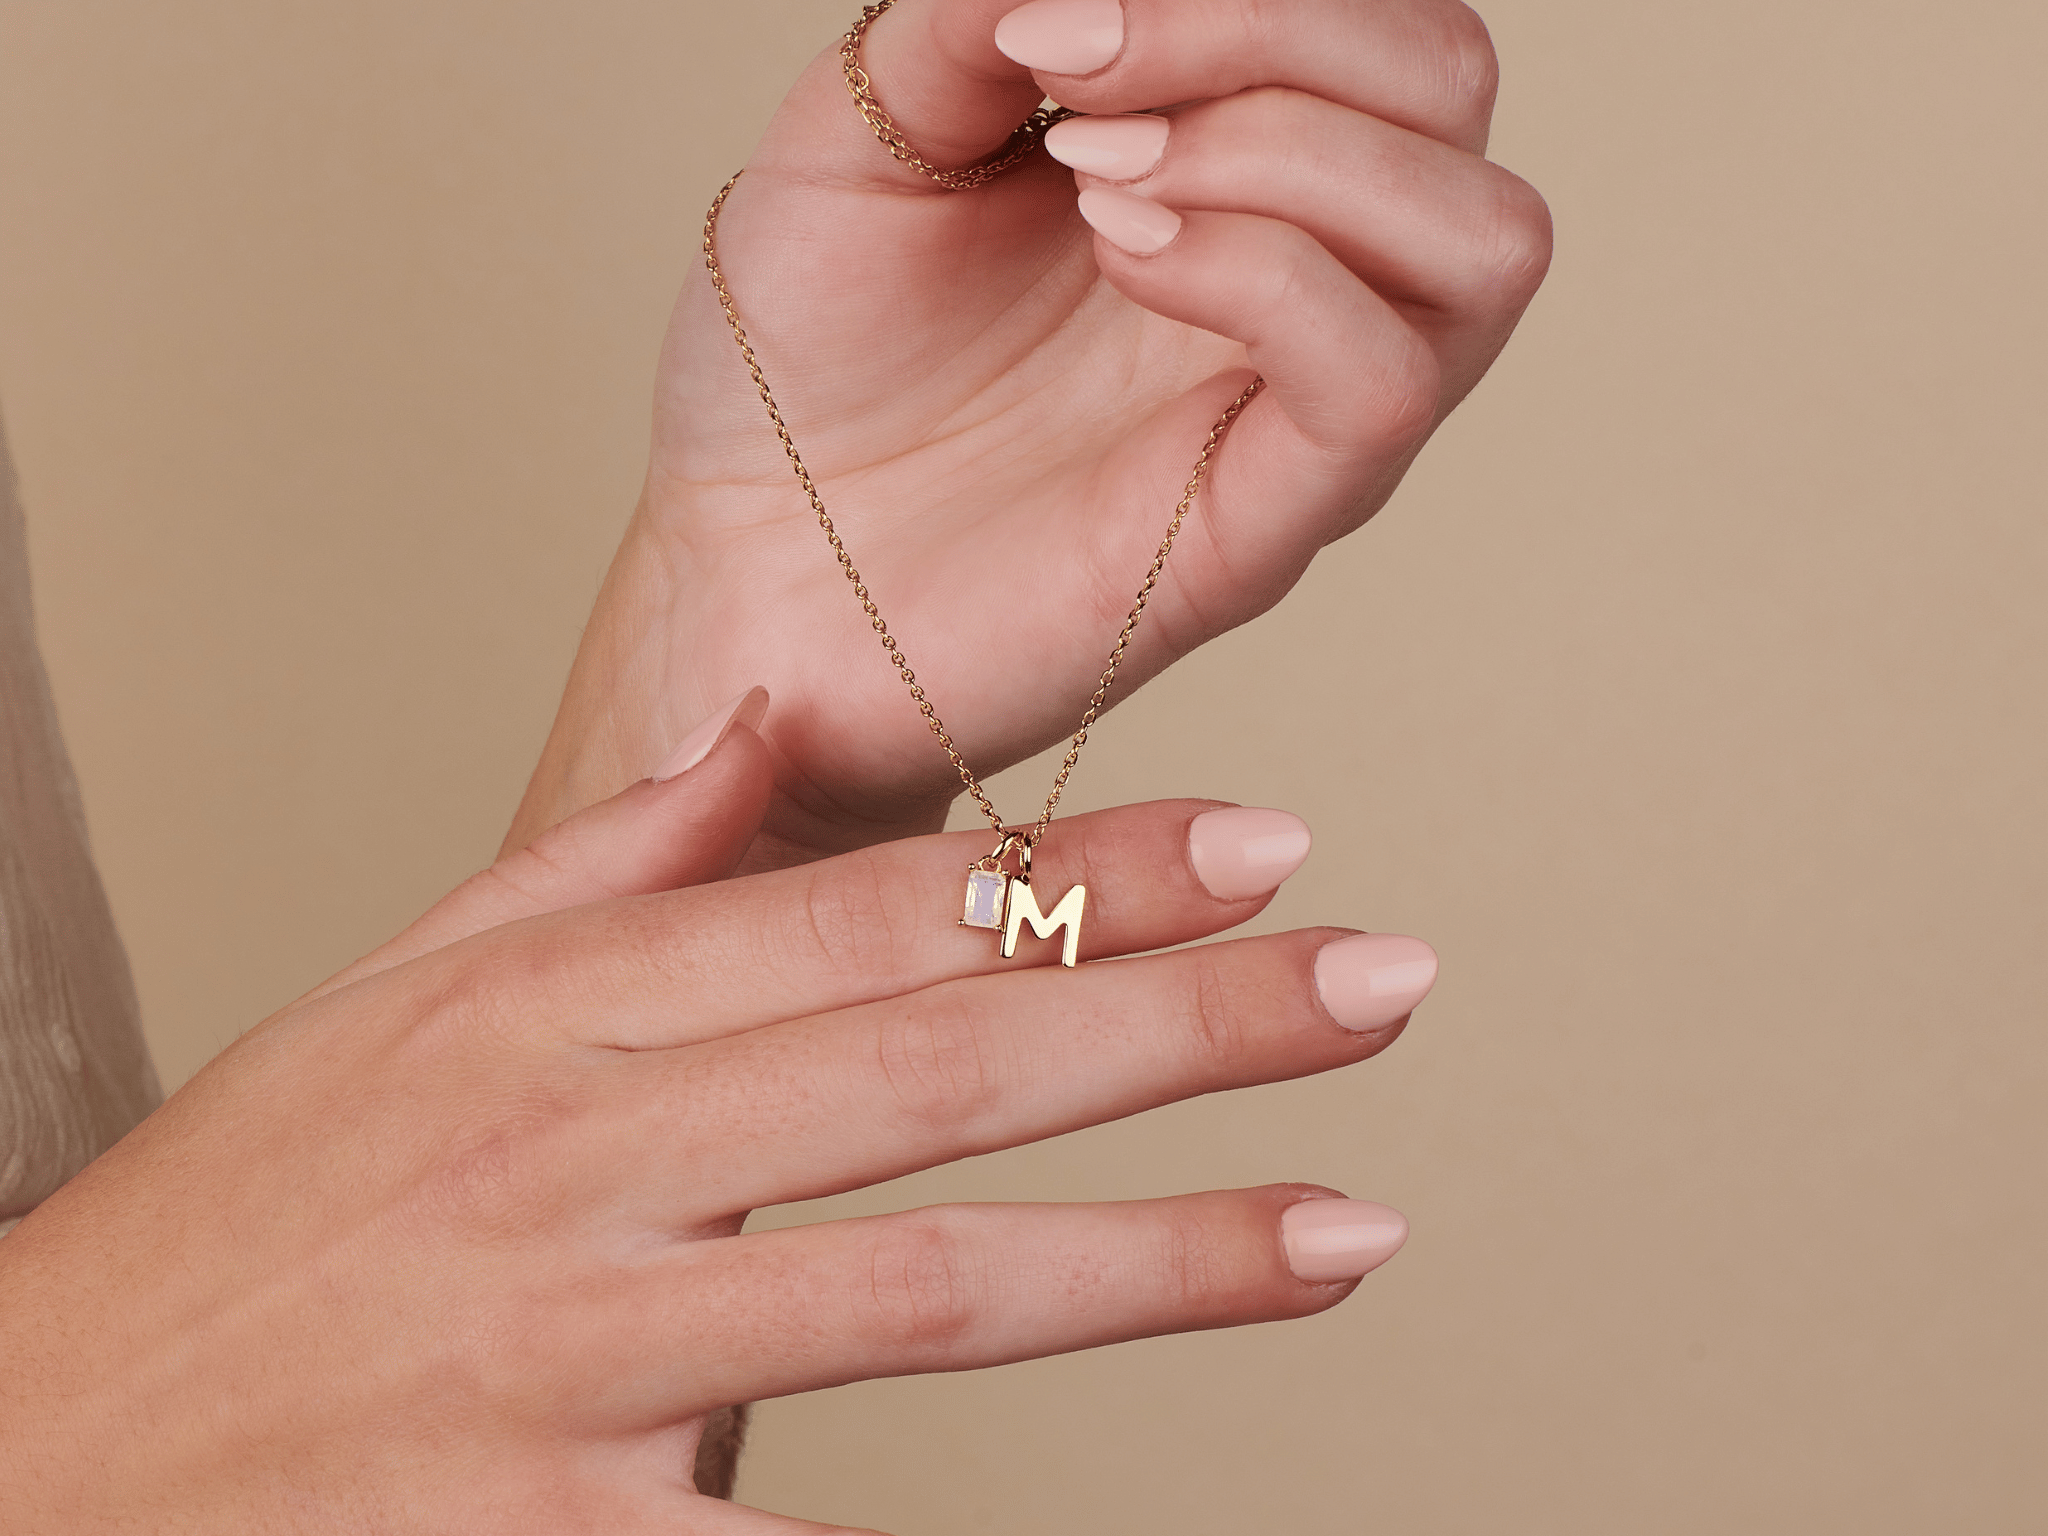 Personalized Jewelry: More Than Just an Accessory